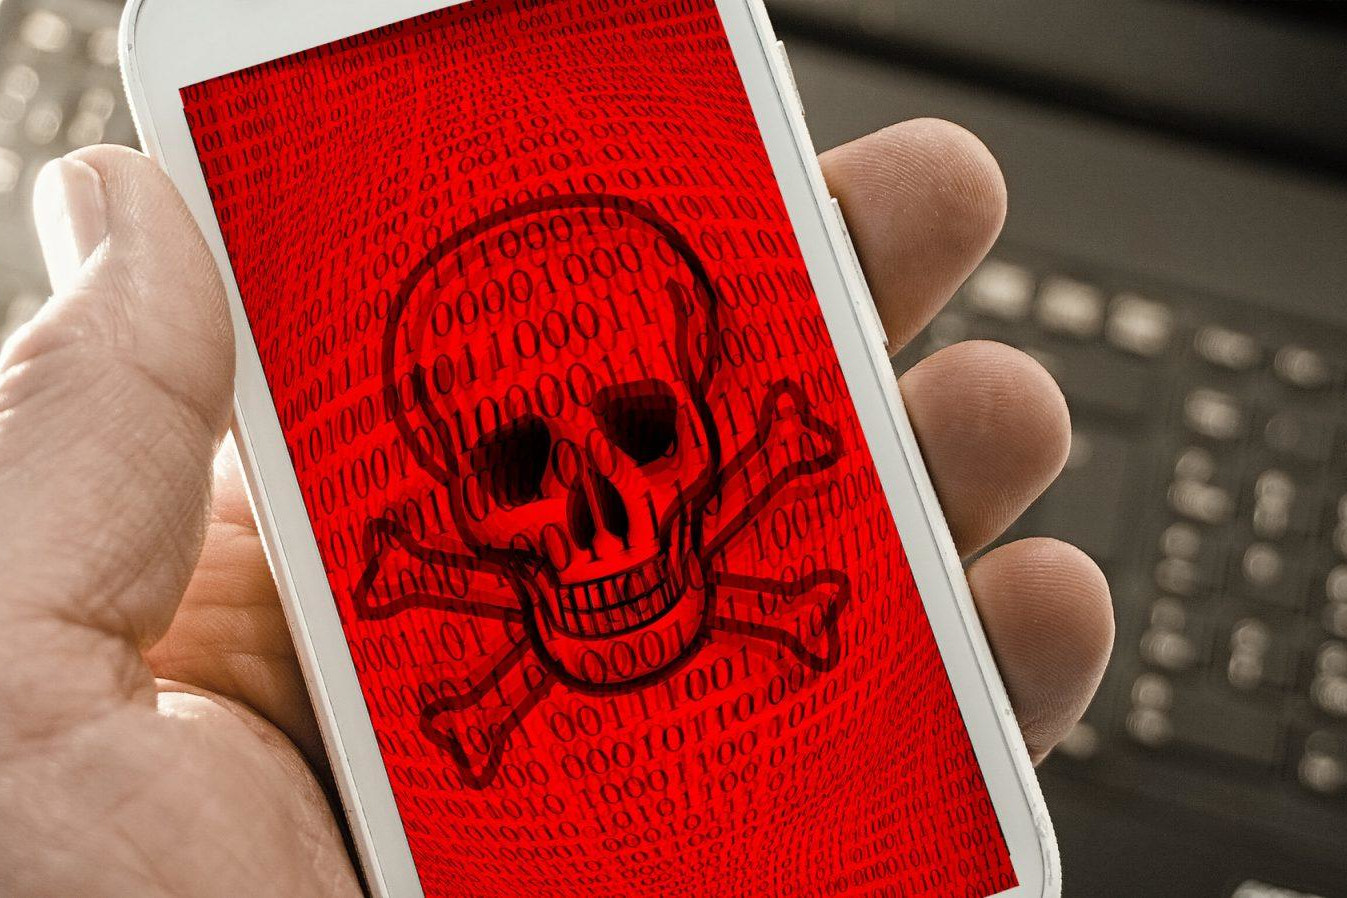 How to Diagnose and Remove Malware from Android Phone